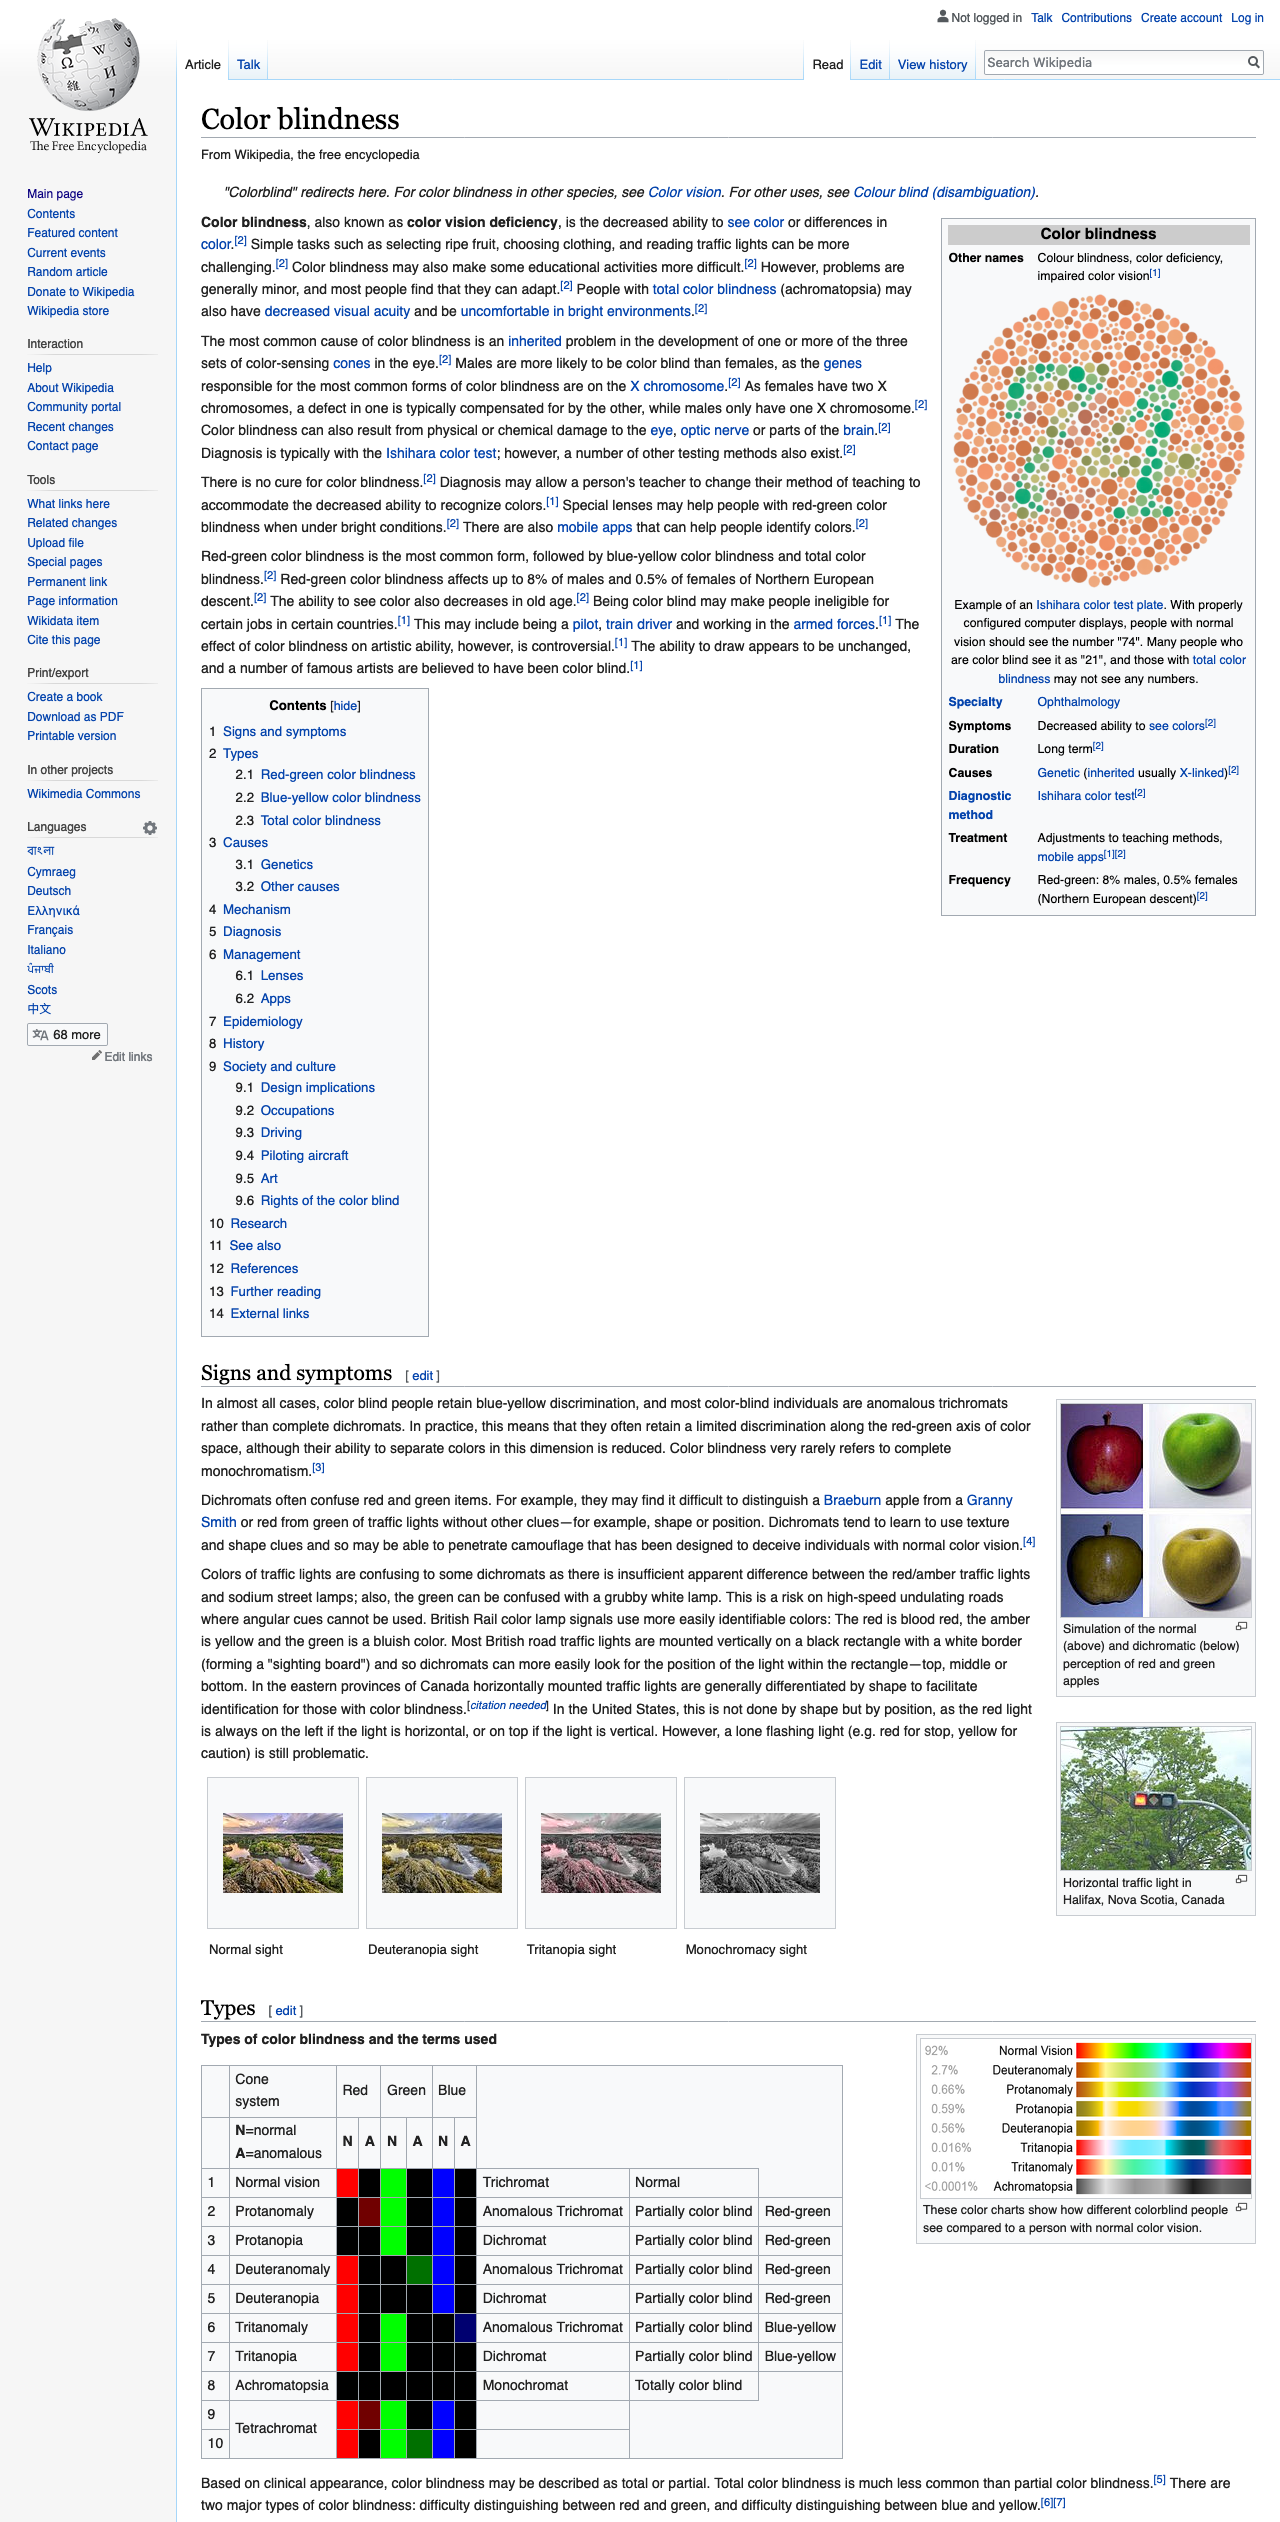 Overview of the Wikipedia article on colour perception deficit